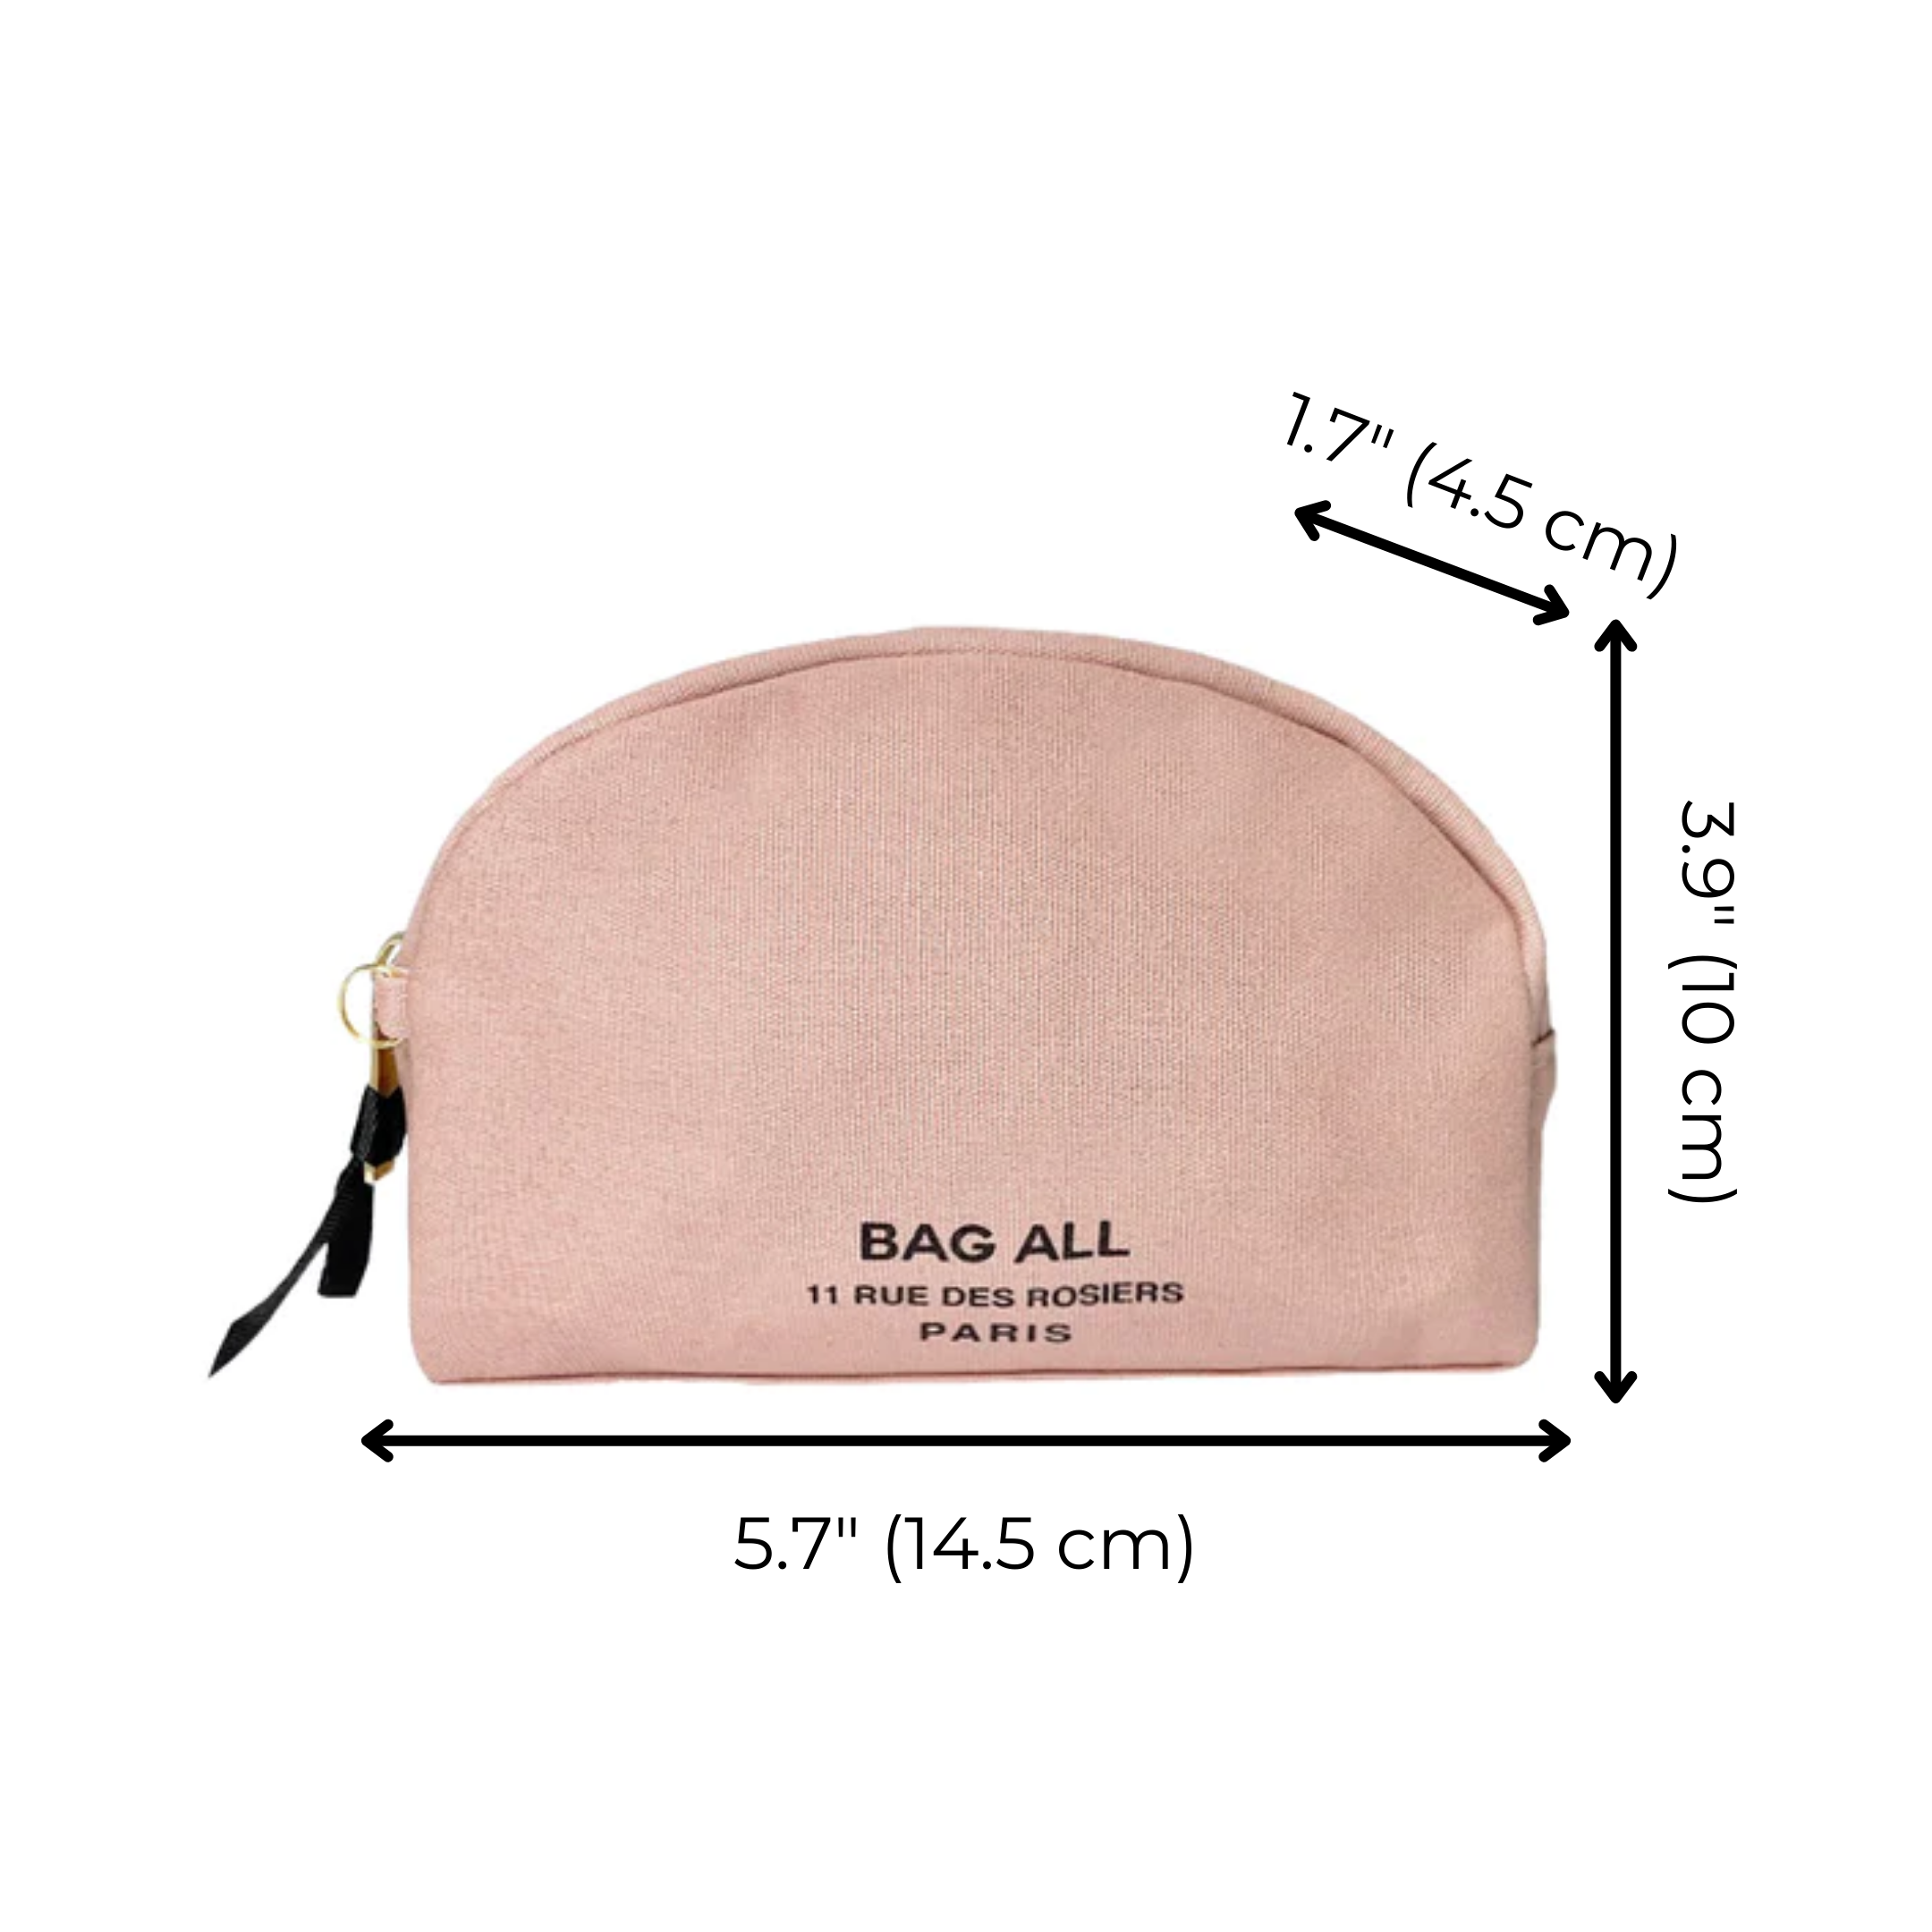 Trinket & Make up Pouch in Cotton, Pink/Blush | Bag-all